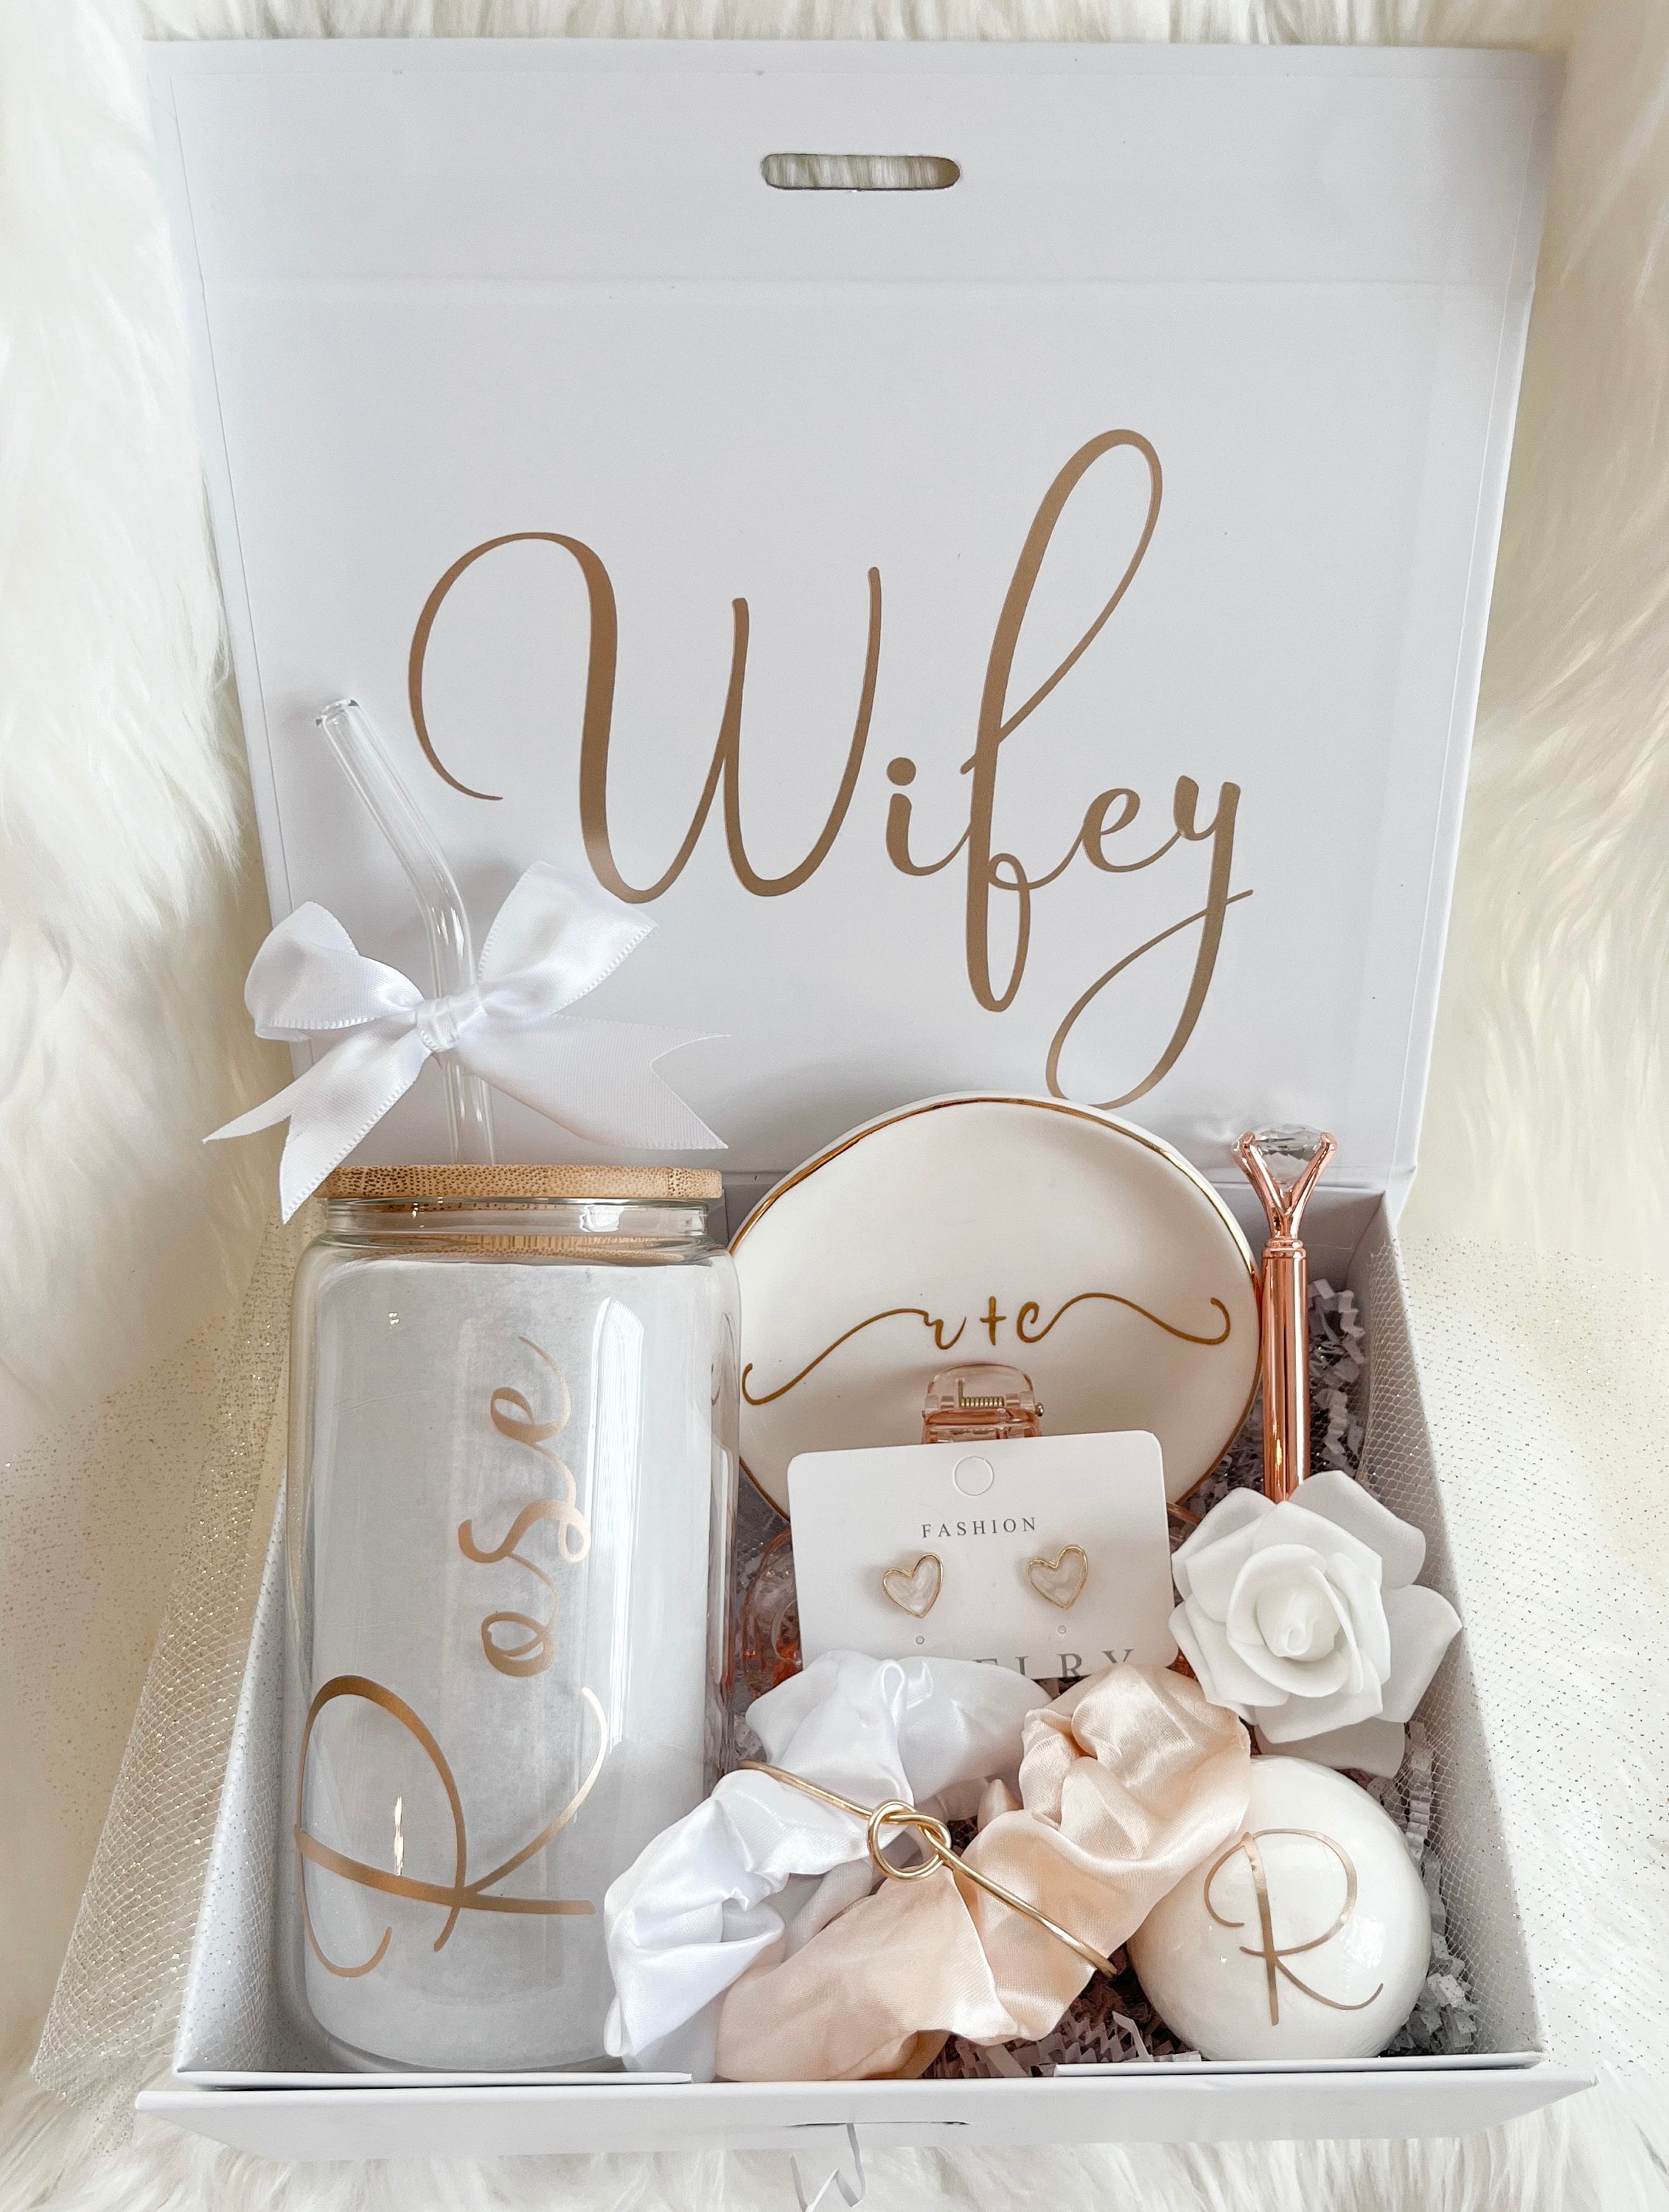 Bride to Be Gifts Box, Best Bridal Shower Bachelorette Gifts for Bride, Wedding Gift Engagement Gifts for Women, Bachelor Party Gifts Fiance Gifts